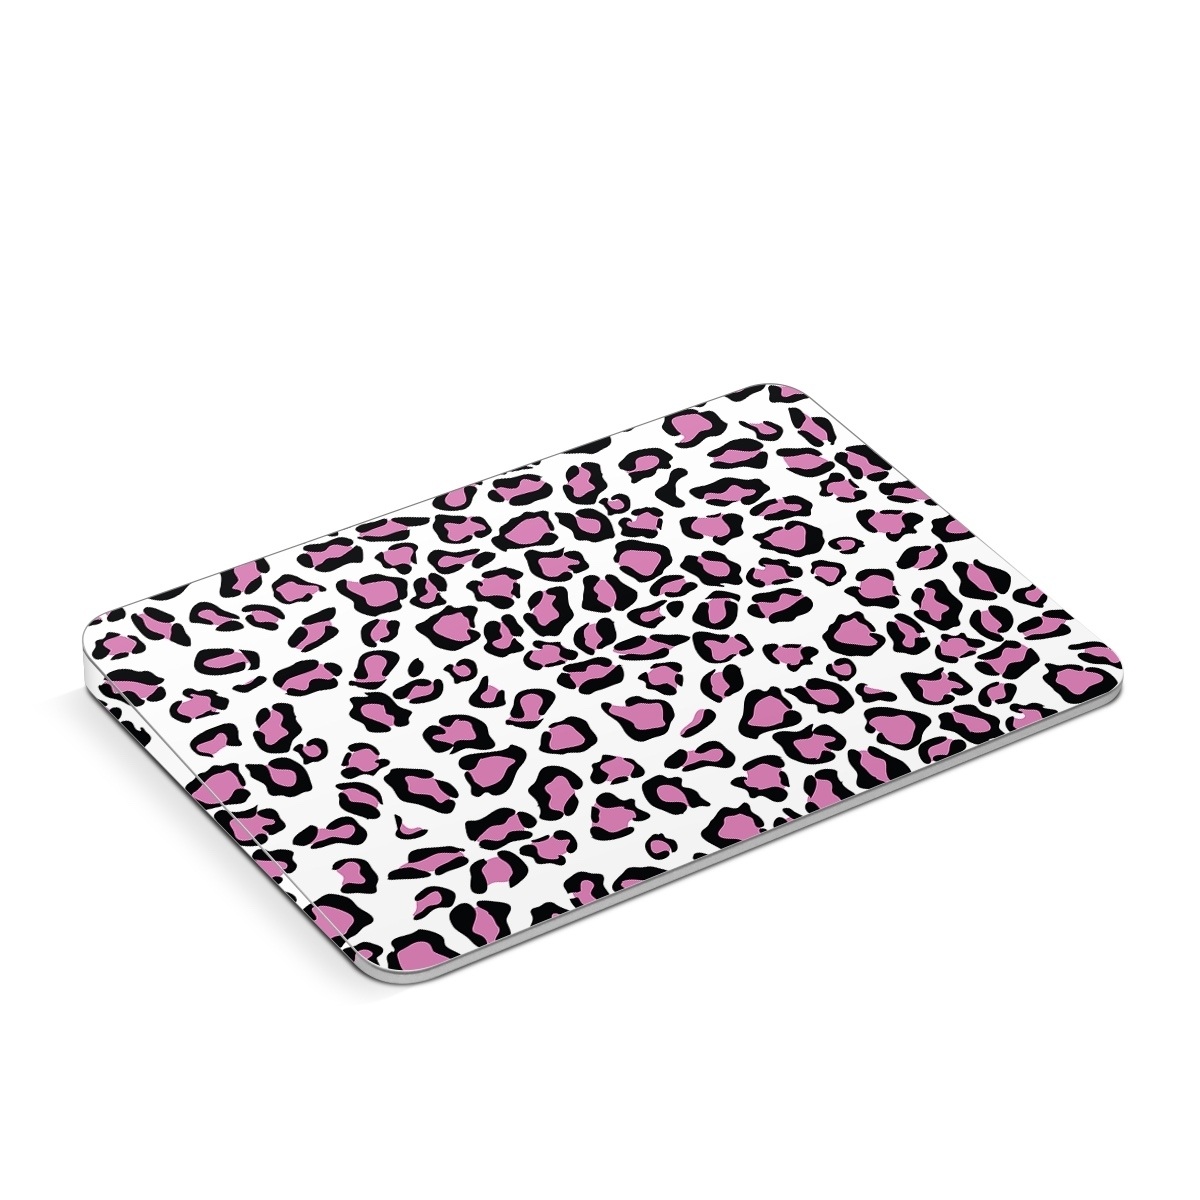 Apple Magic Trackpad Skin design of Pink, Pattern, Design, Textile, Magenta, with white, black, gray, purple, red colors